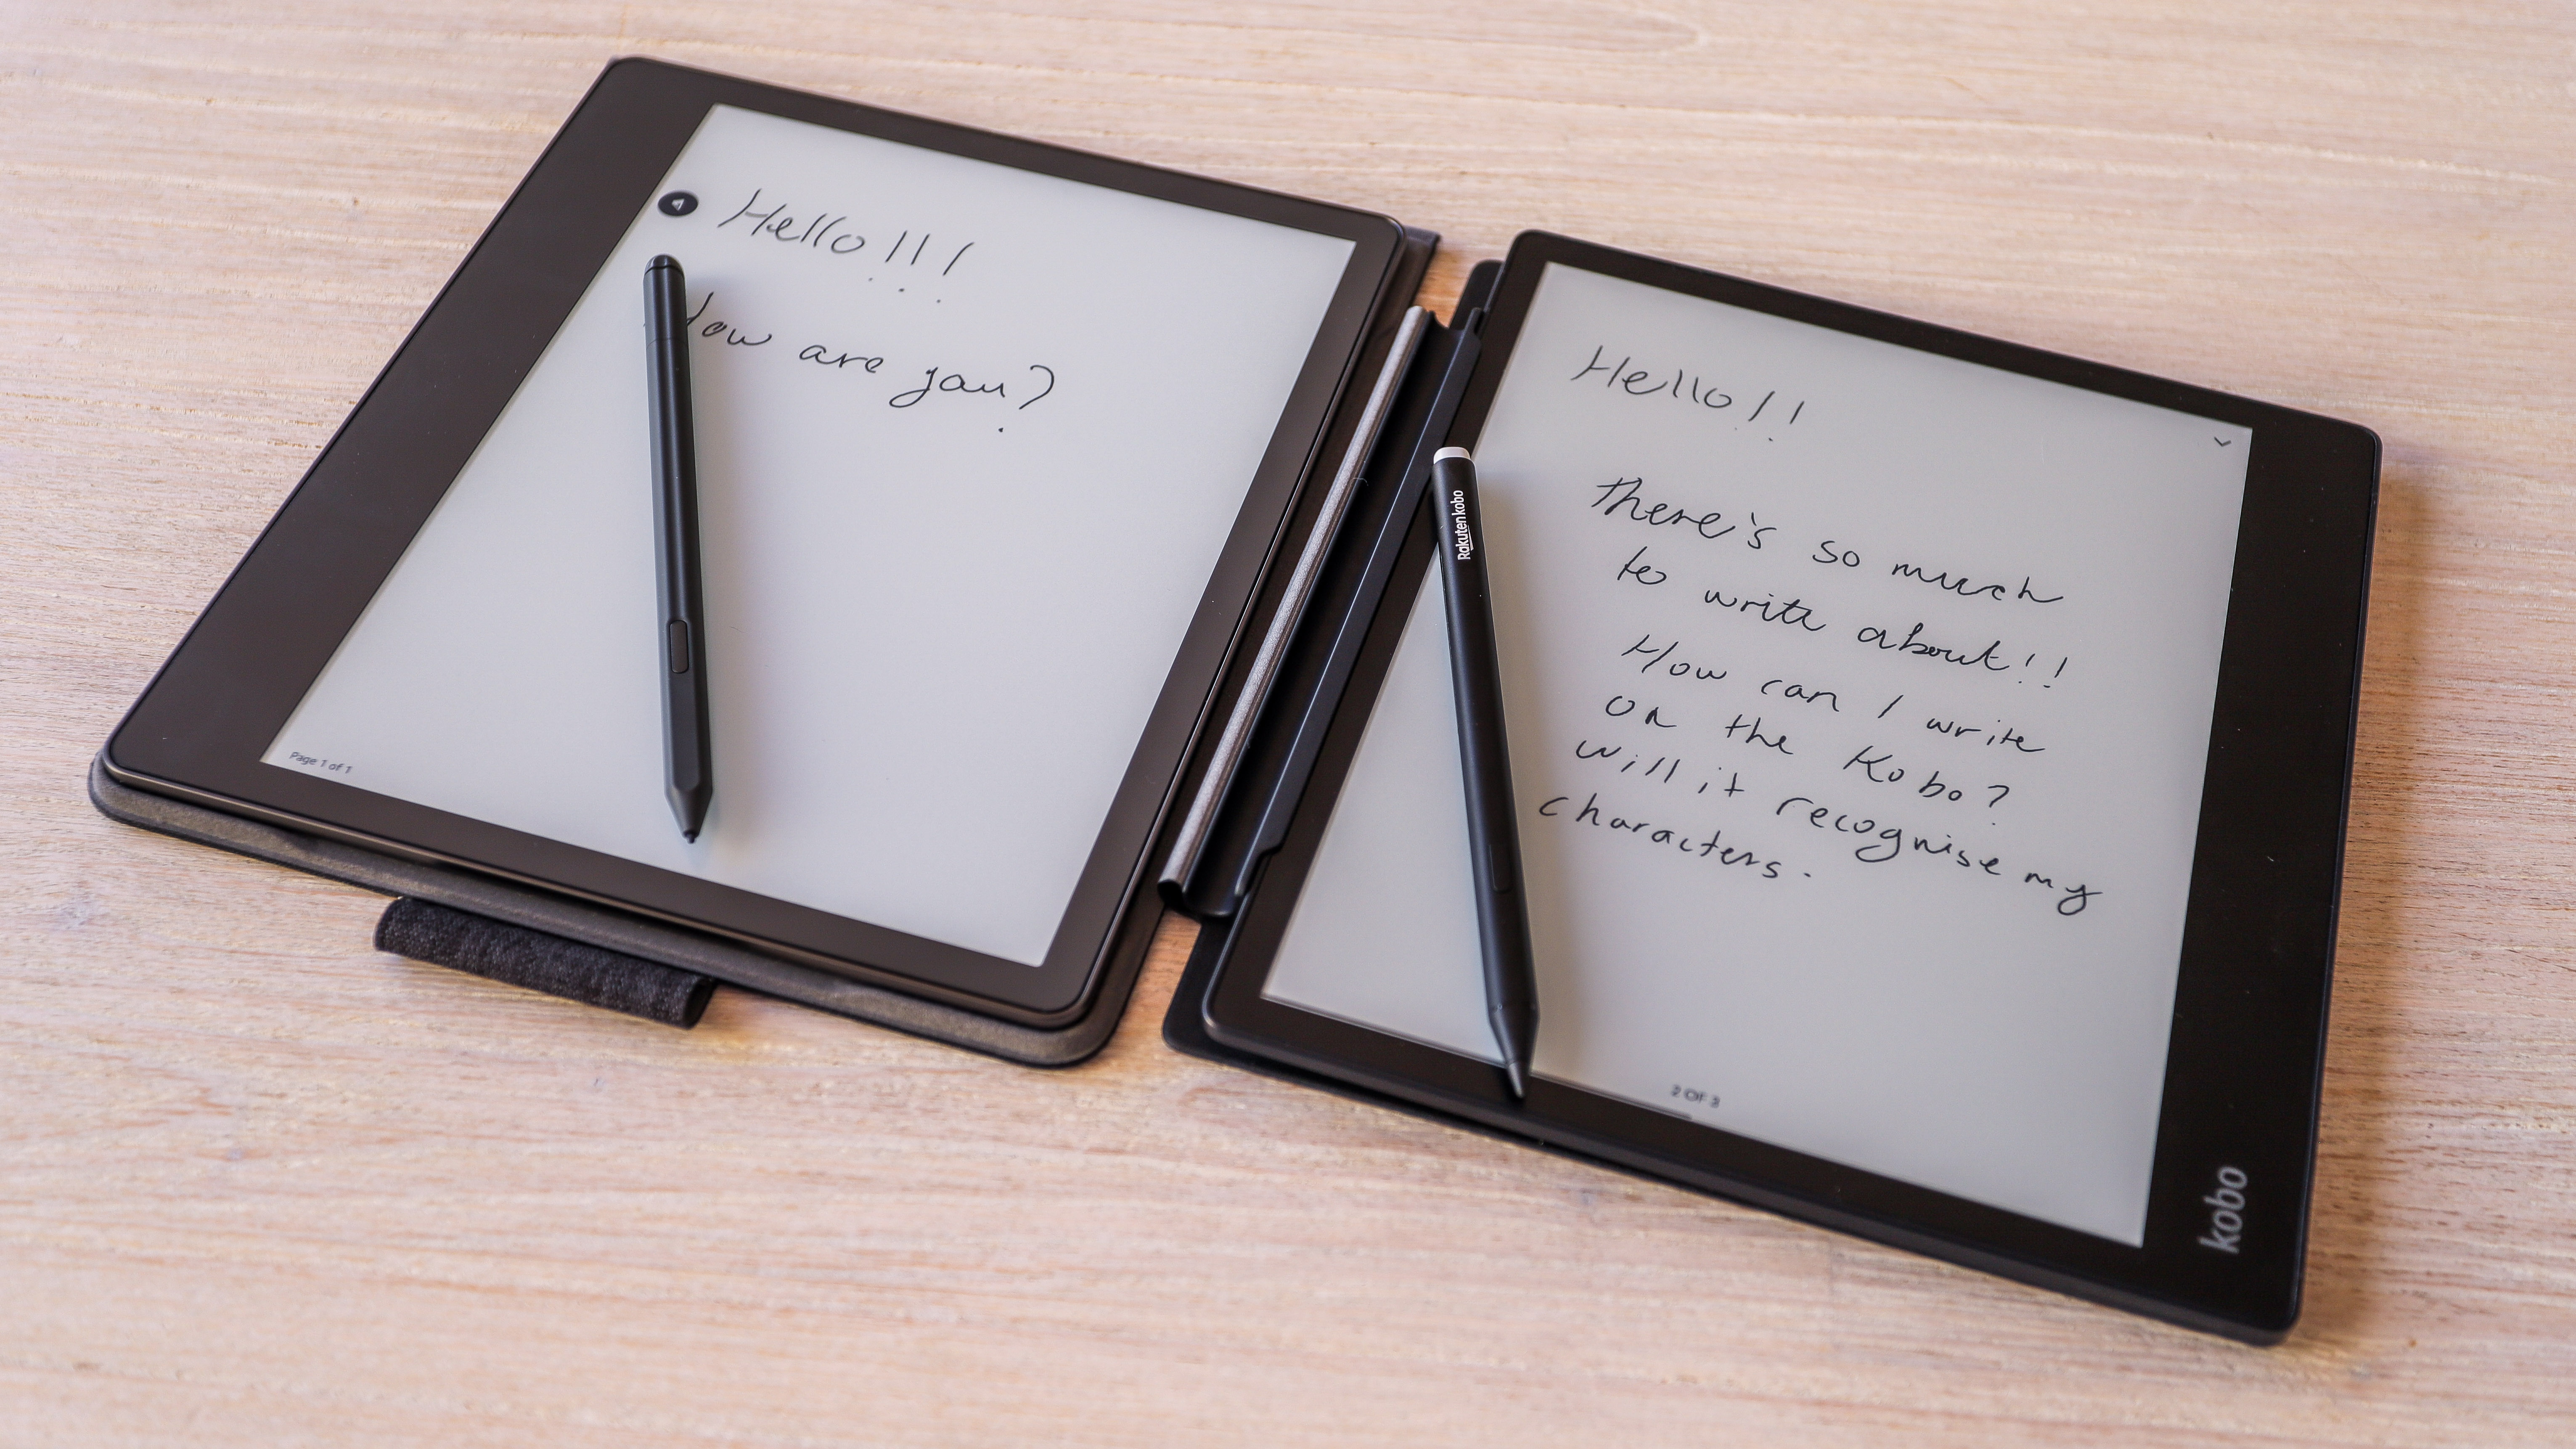 The Kindle Scribe is great, but the Kobo Elipsa 2E is the better